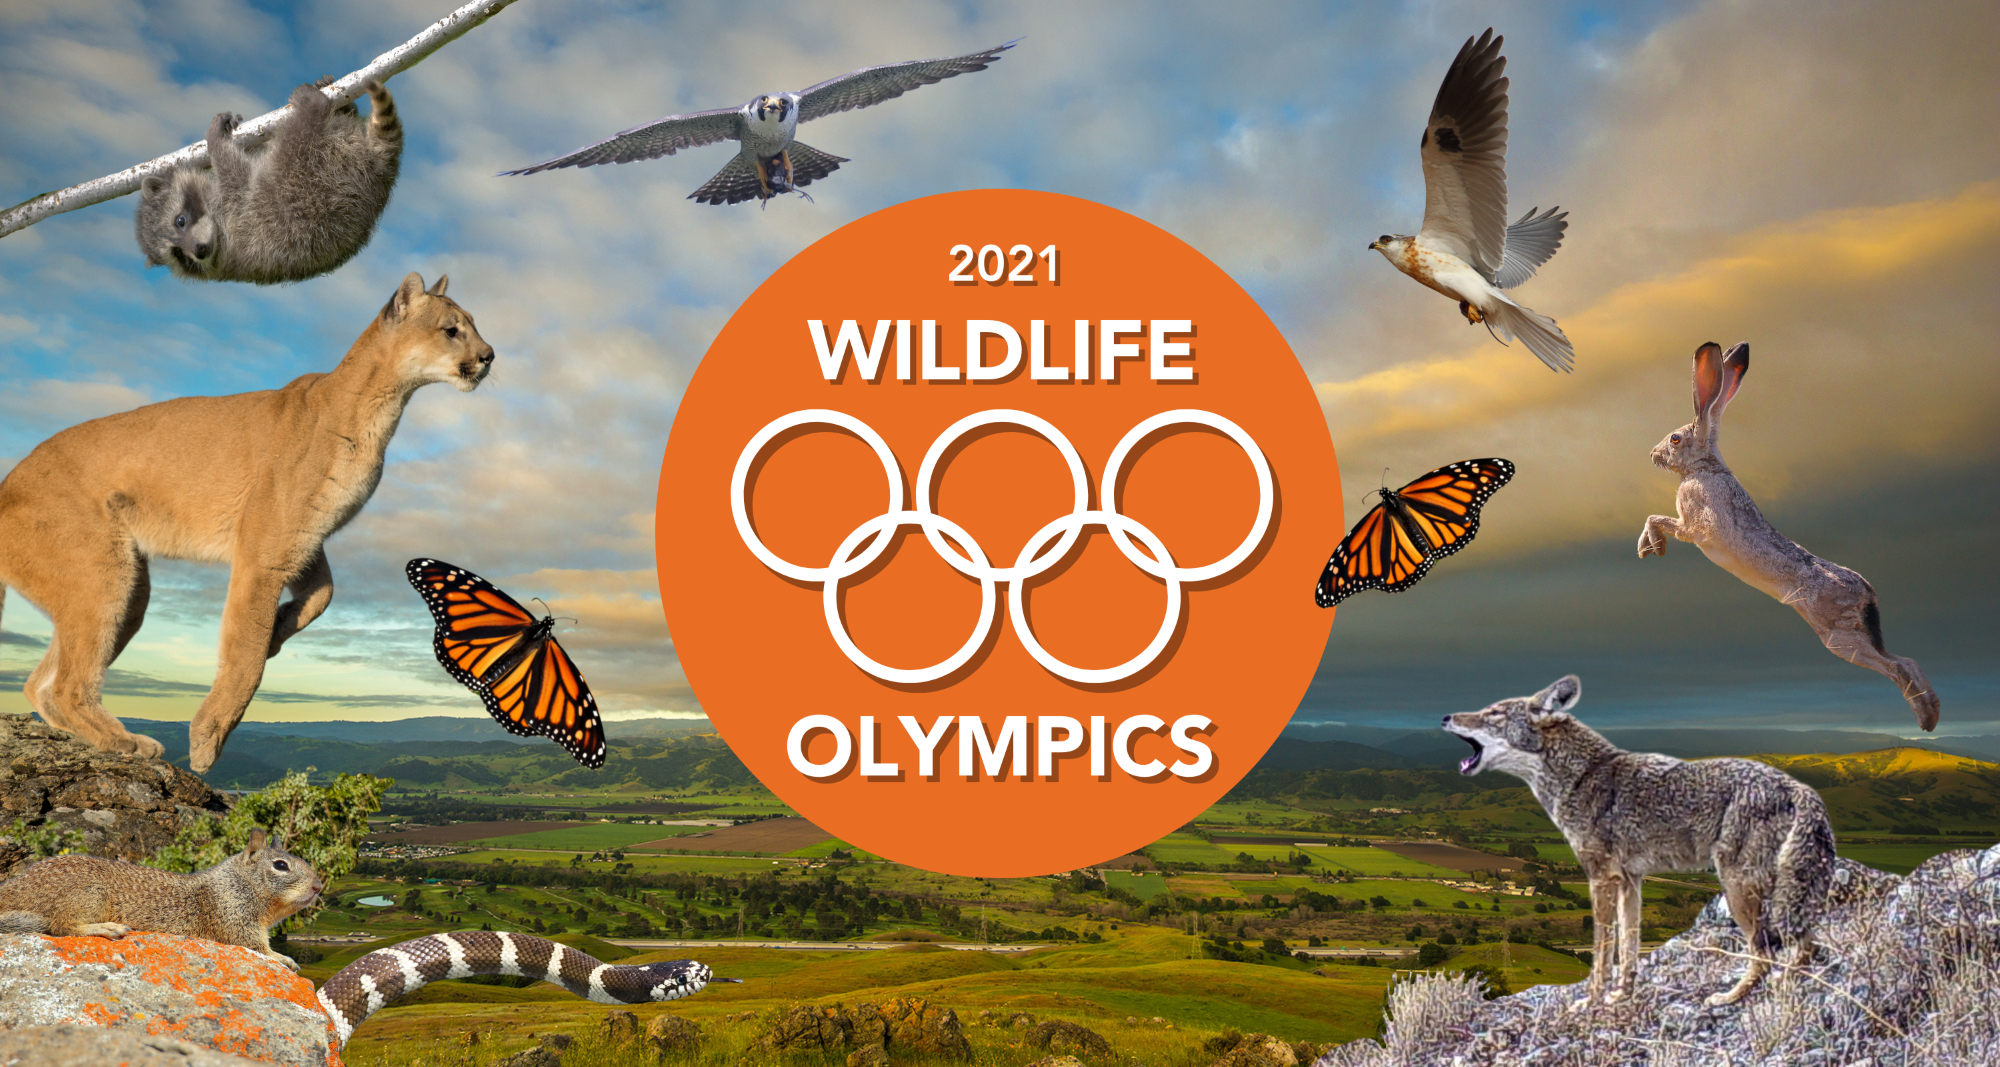 Santa Clara Valley Wildlife Olympics collage with animals and Olympic rings